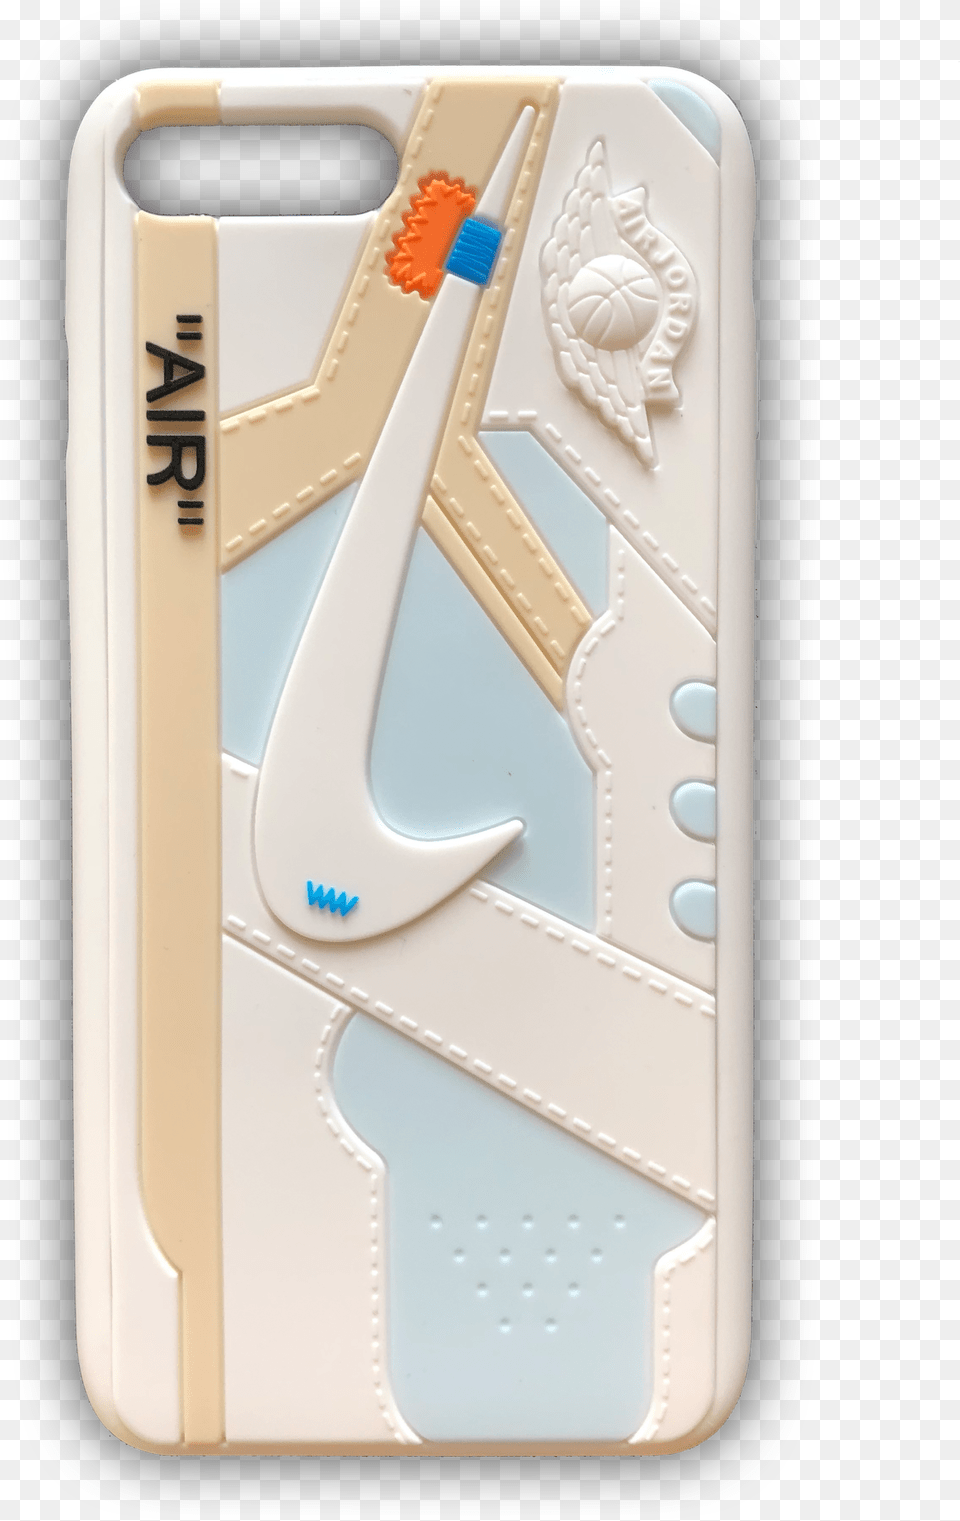 Off White 3d Textured Iphone Case Iphone, Brush, Device, Tool, Electronics Png